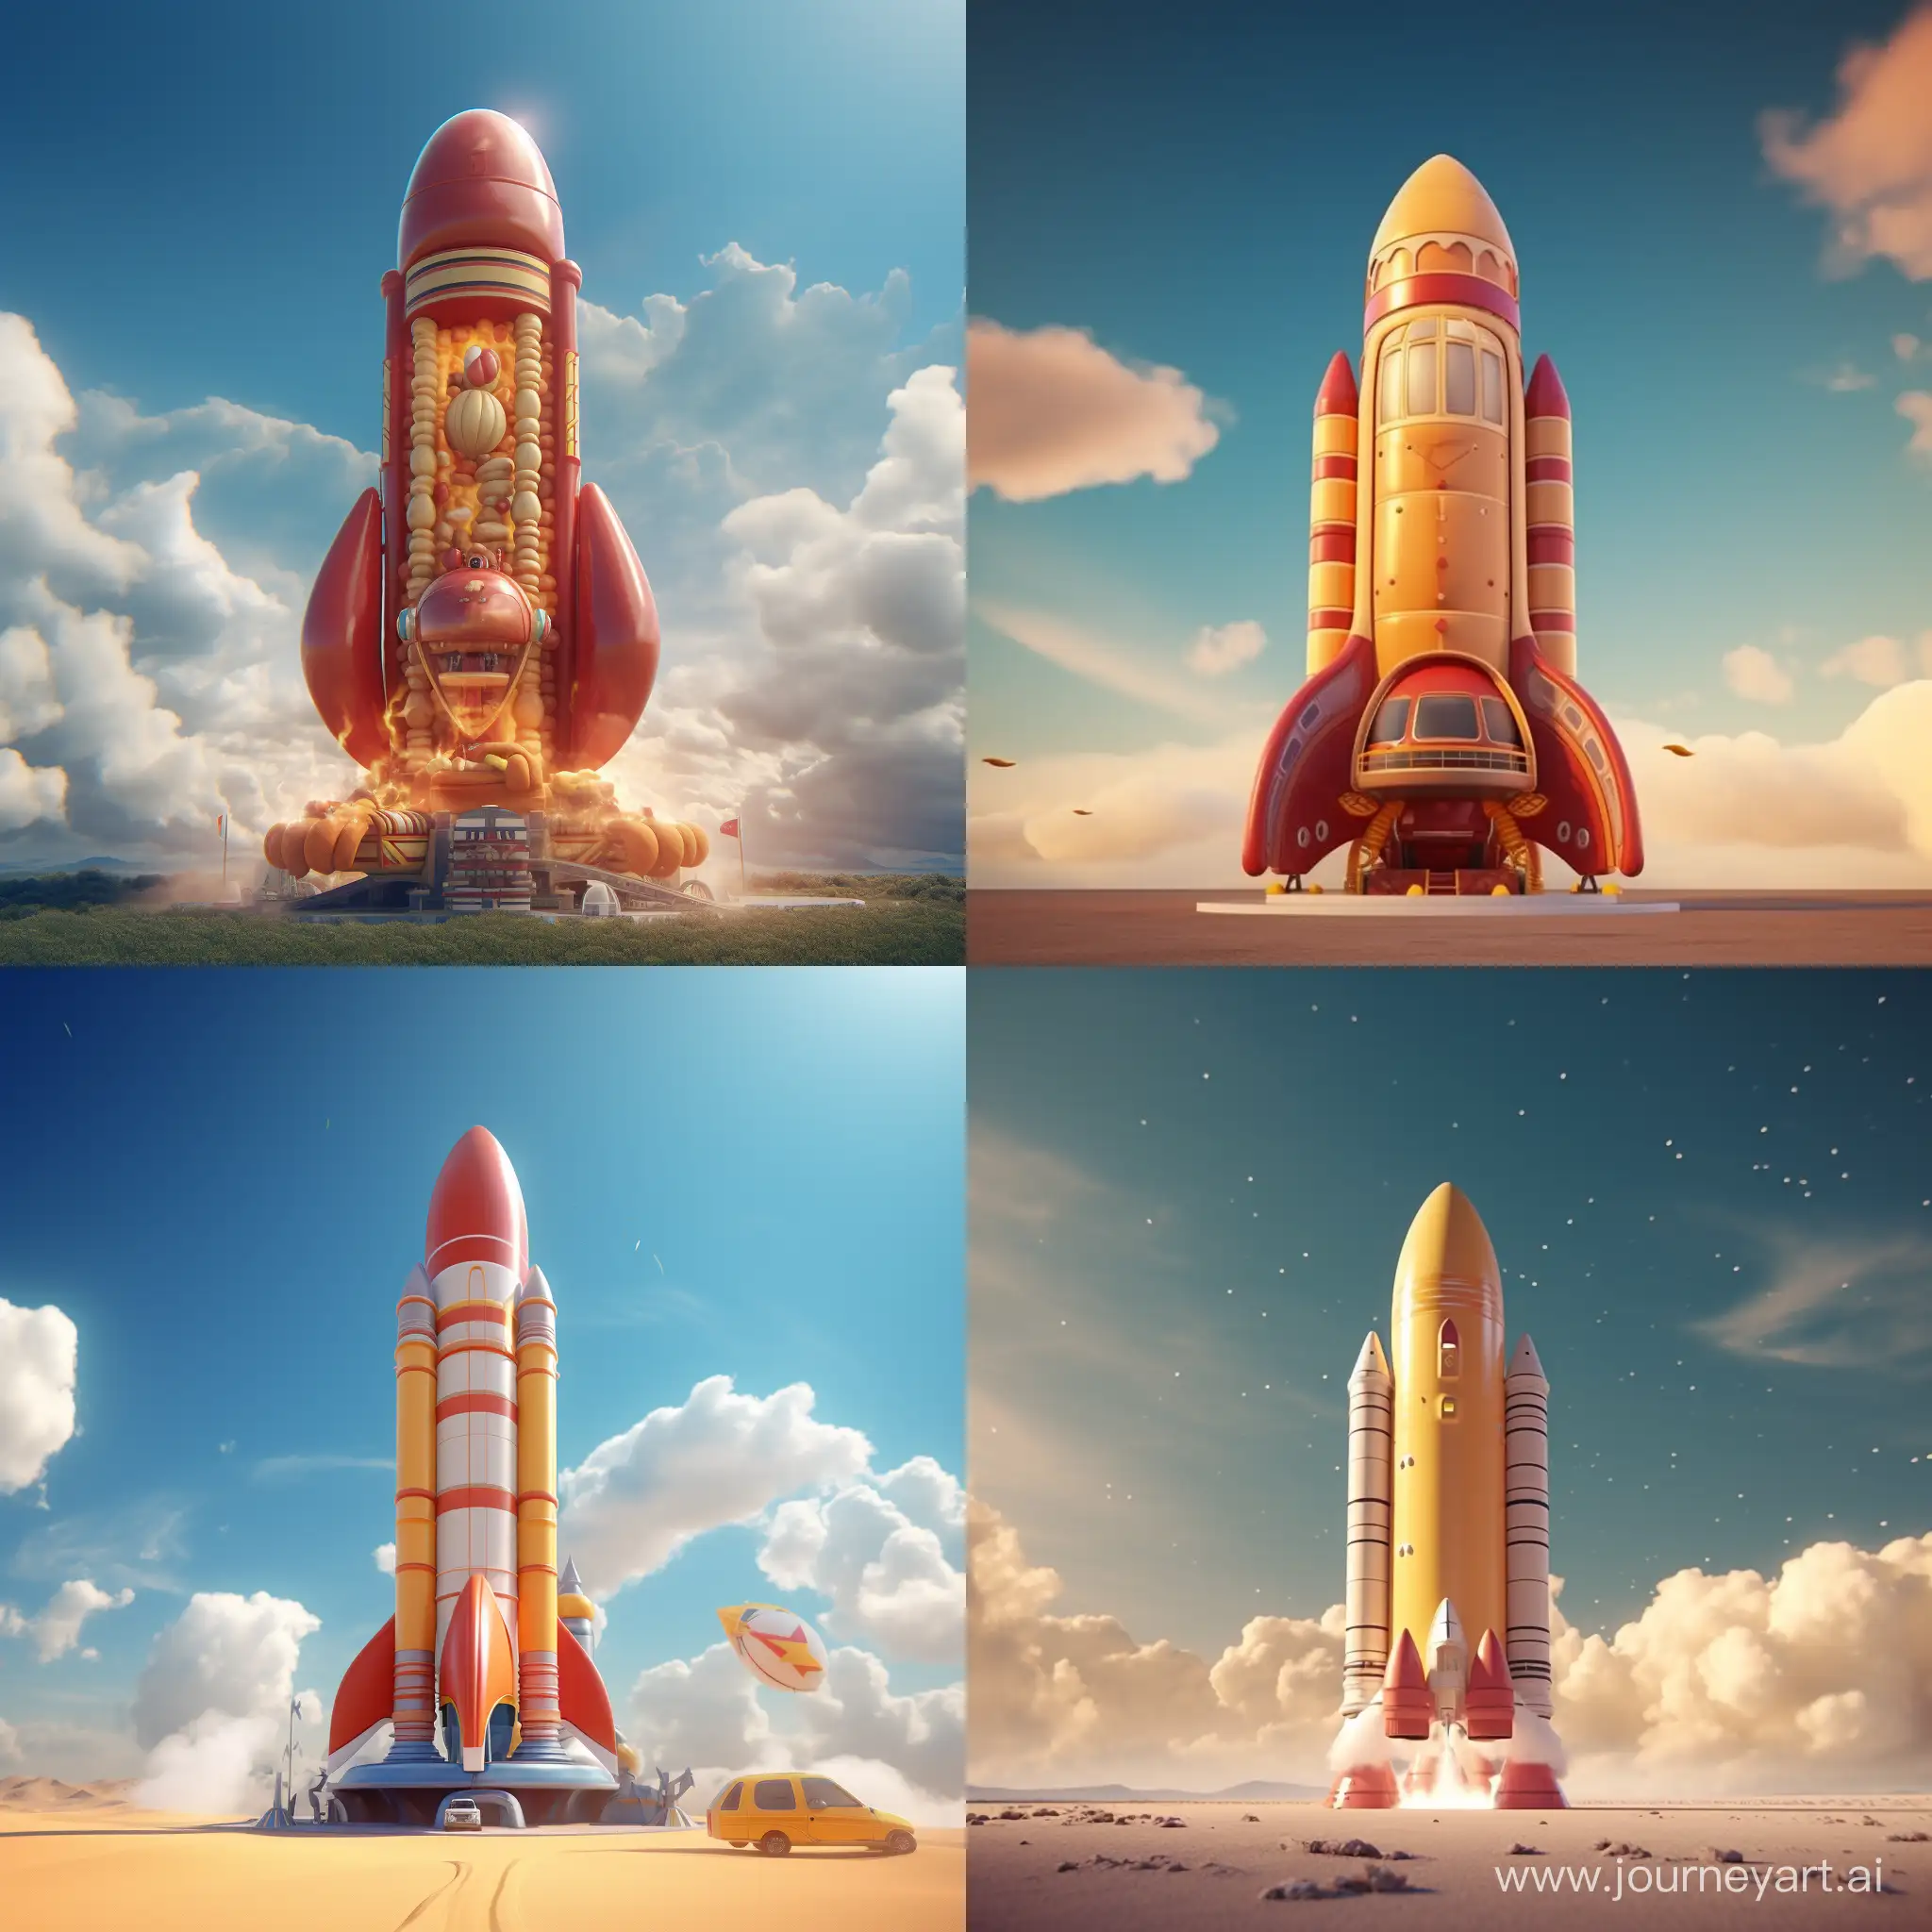 Whimsical-3D-Animation-Giant-Hot-DogShaped-Rocket-Soaring-in-the-Sky